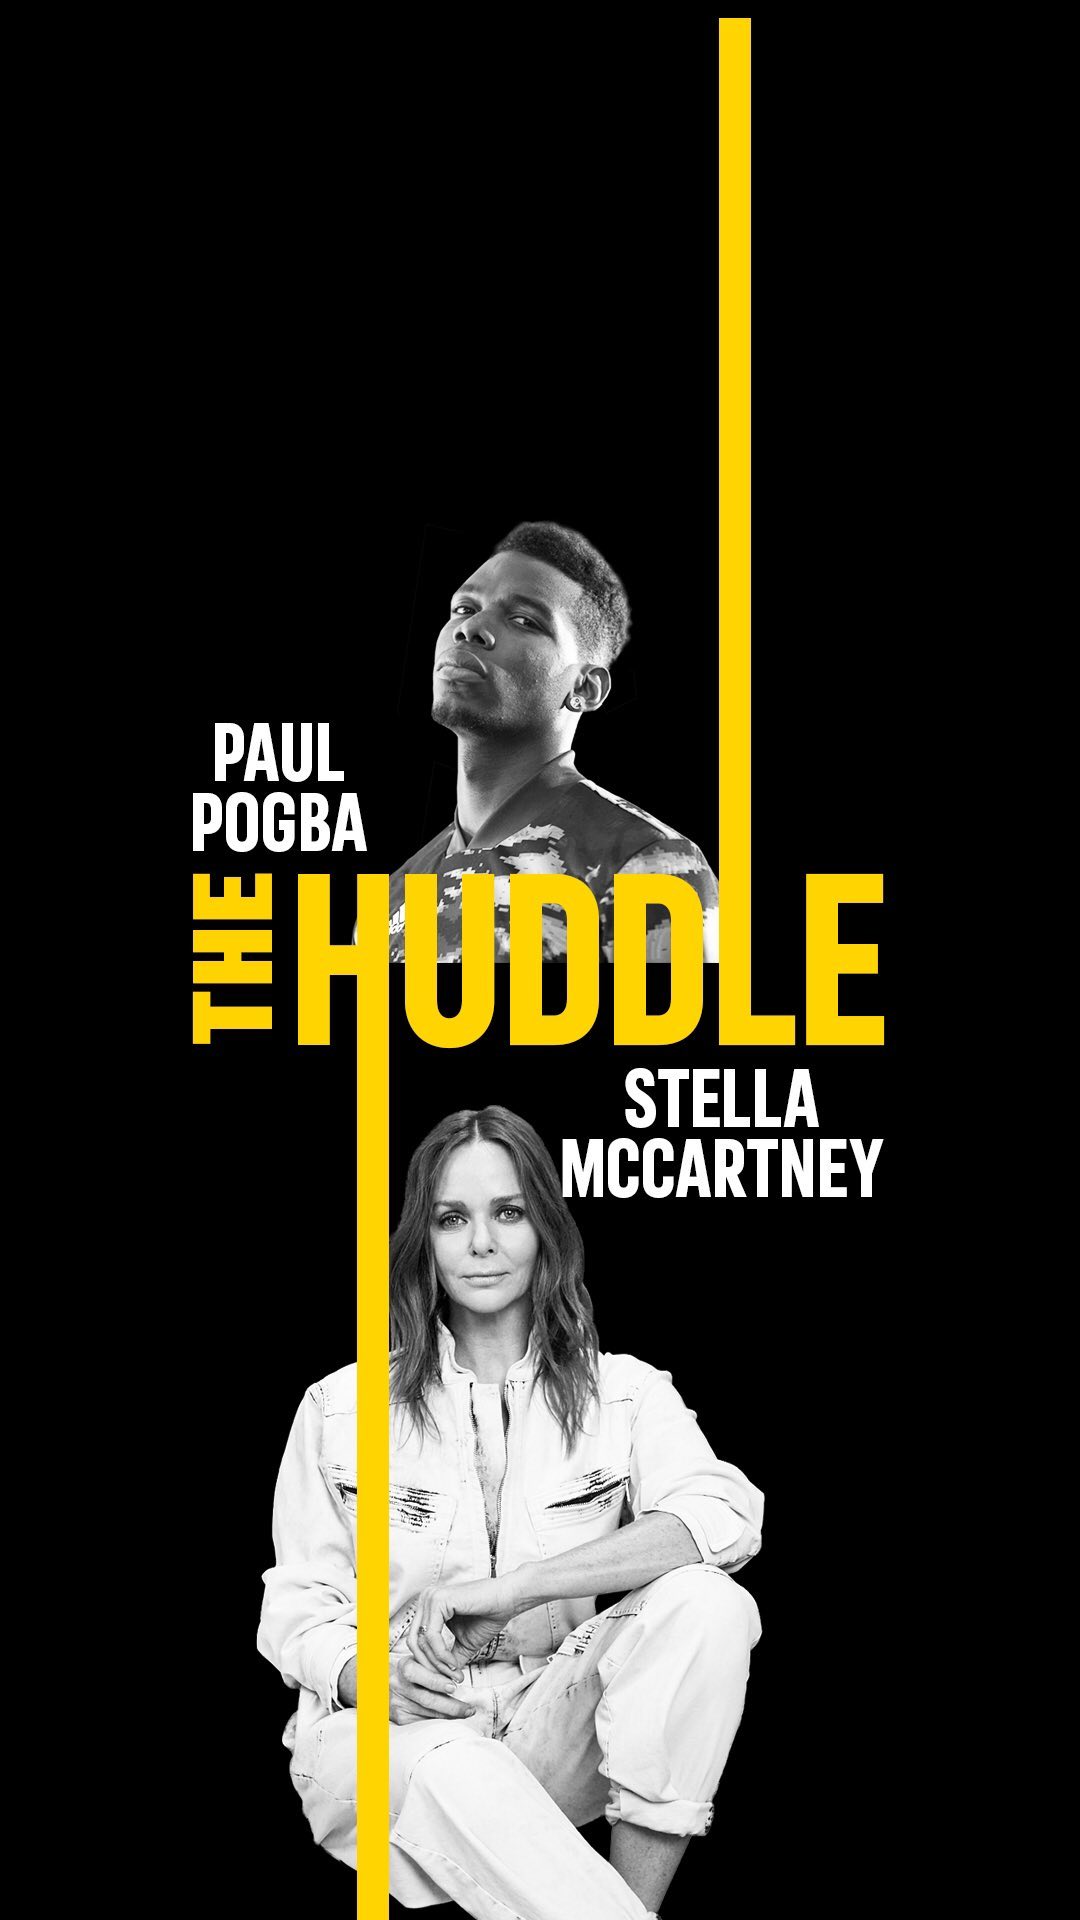 adidas - Watch as @PaulPogba ⚽️ and @StellaMcCartney 🧥 bond through stories of their shared passions for fashion, innovation and giving back. ​⁣⁣
⁣⁣
#hometeam